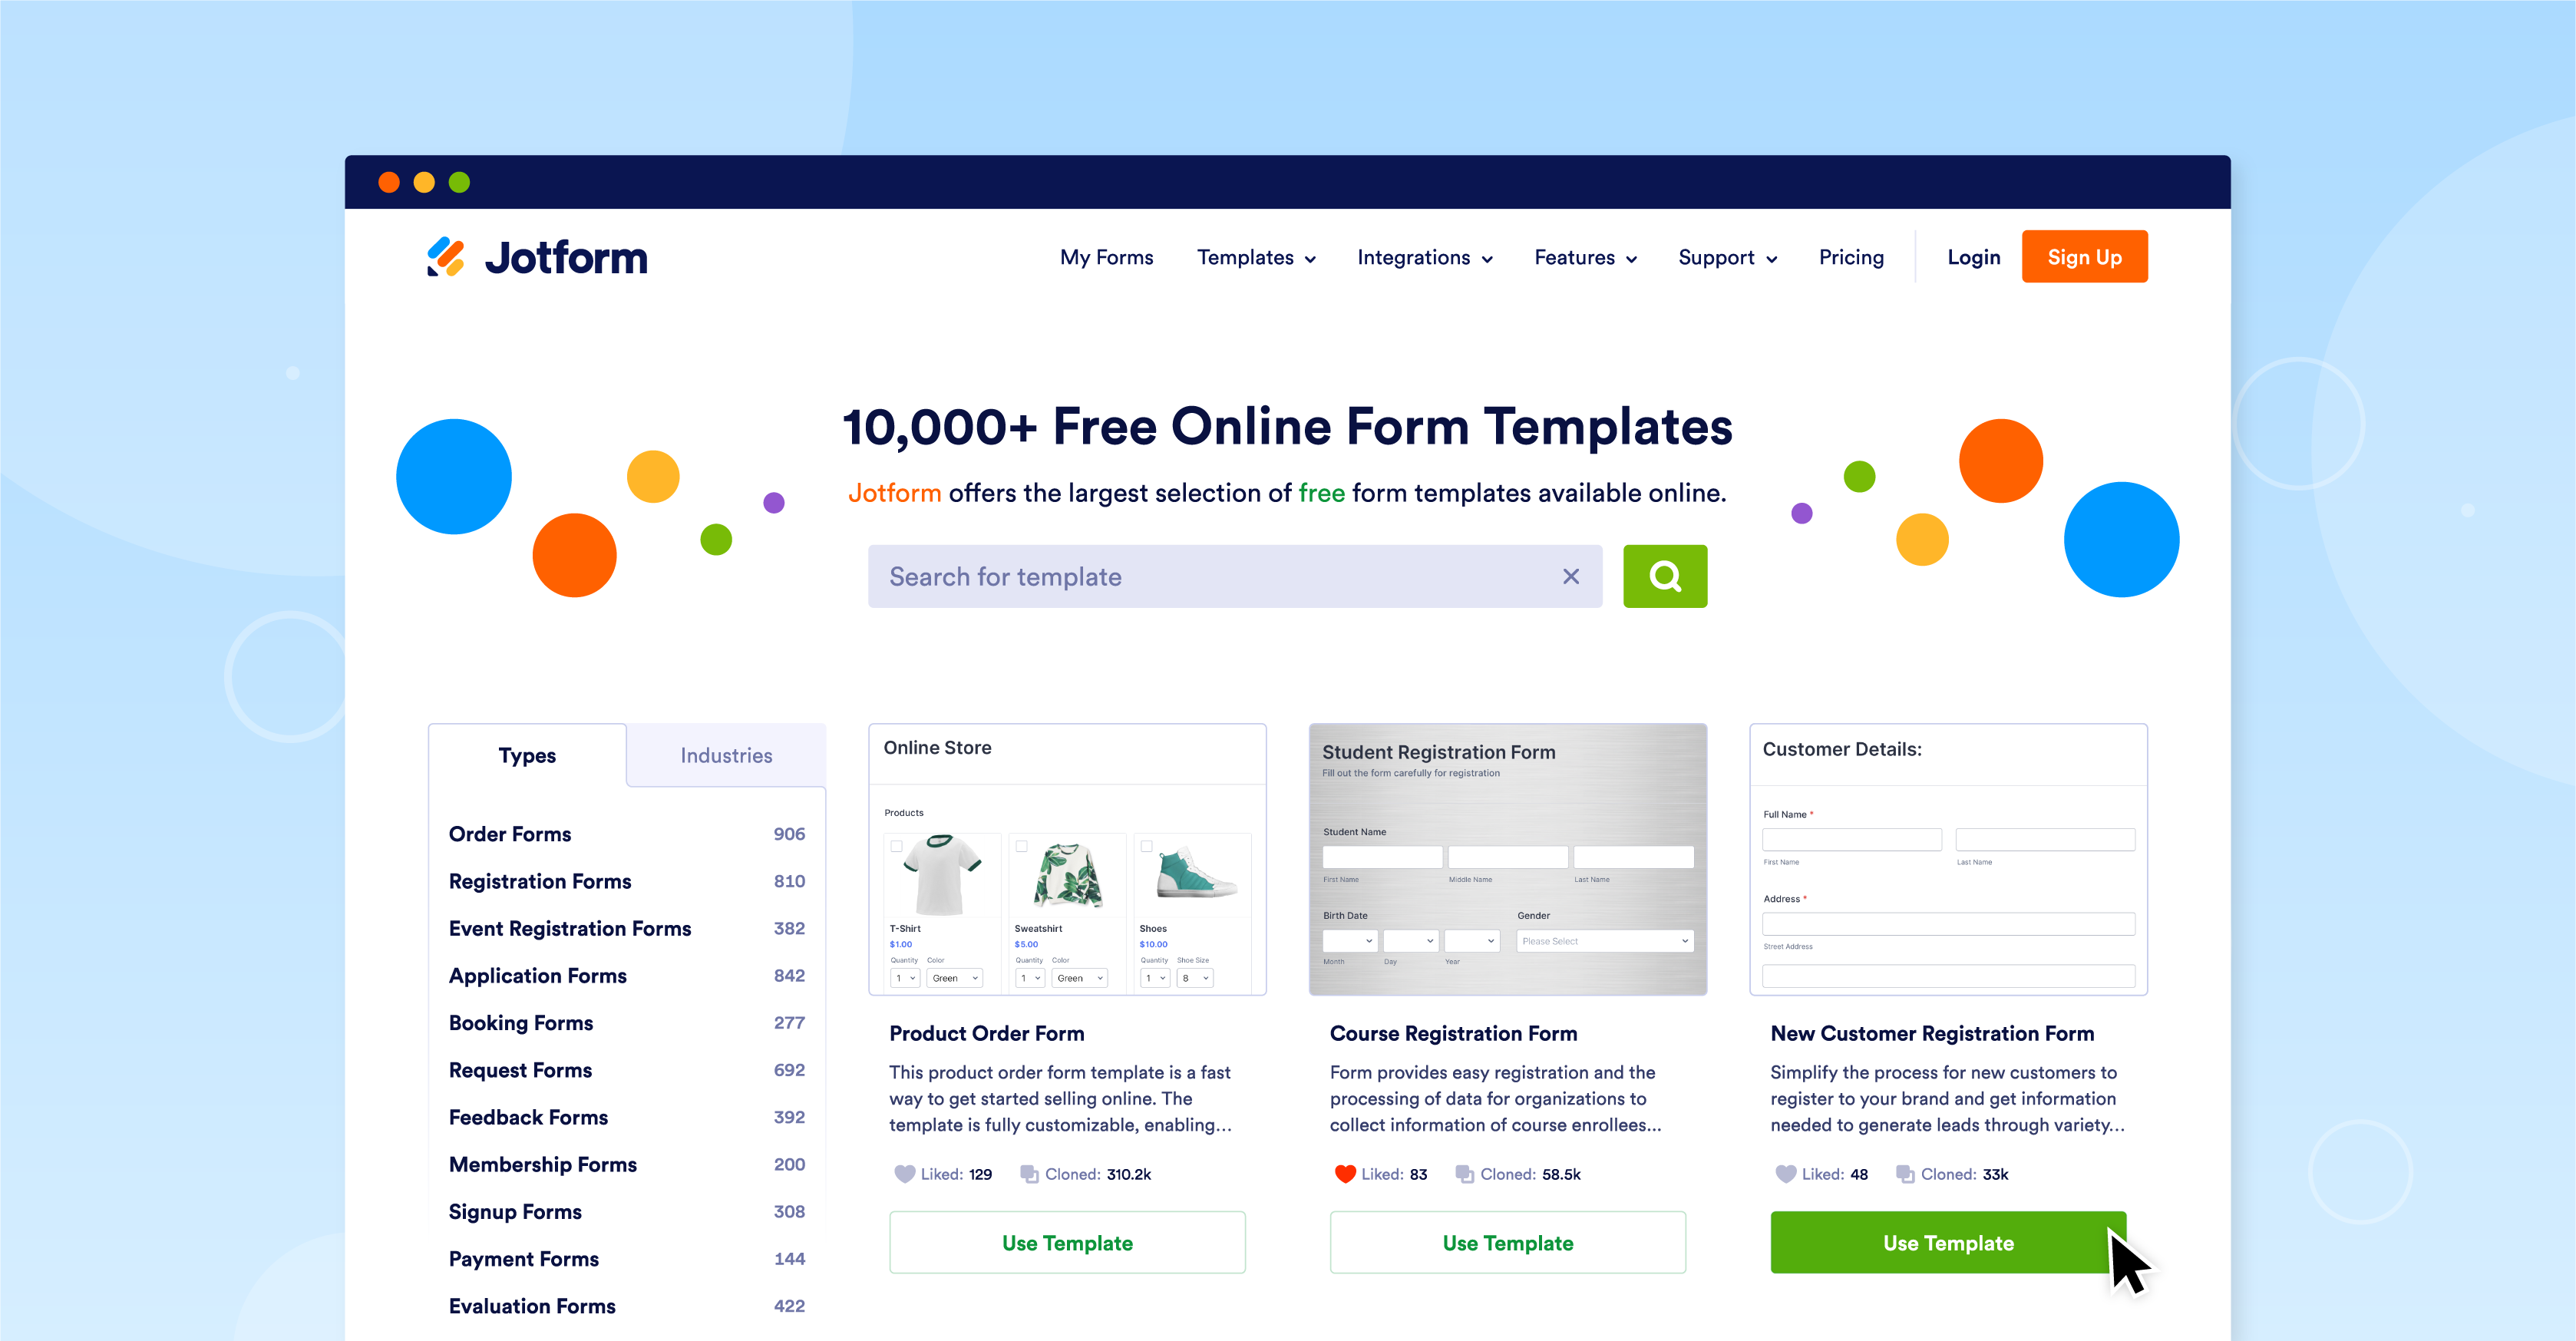 Jotform offers the largest selection of free form templates available online.